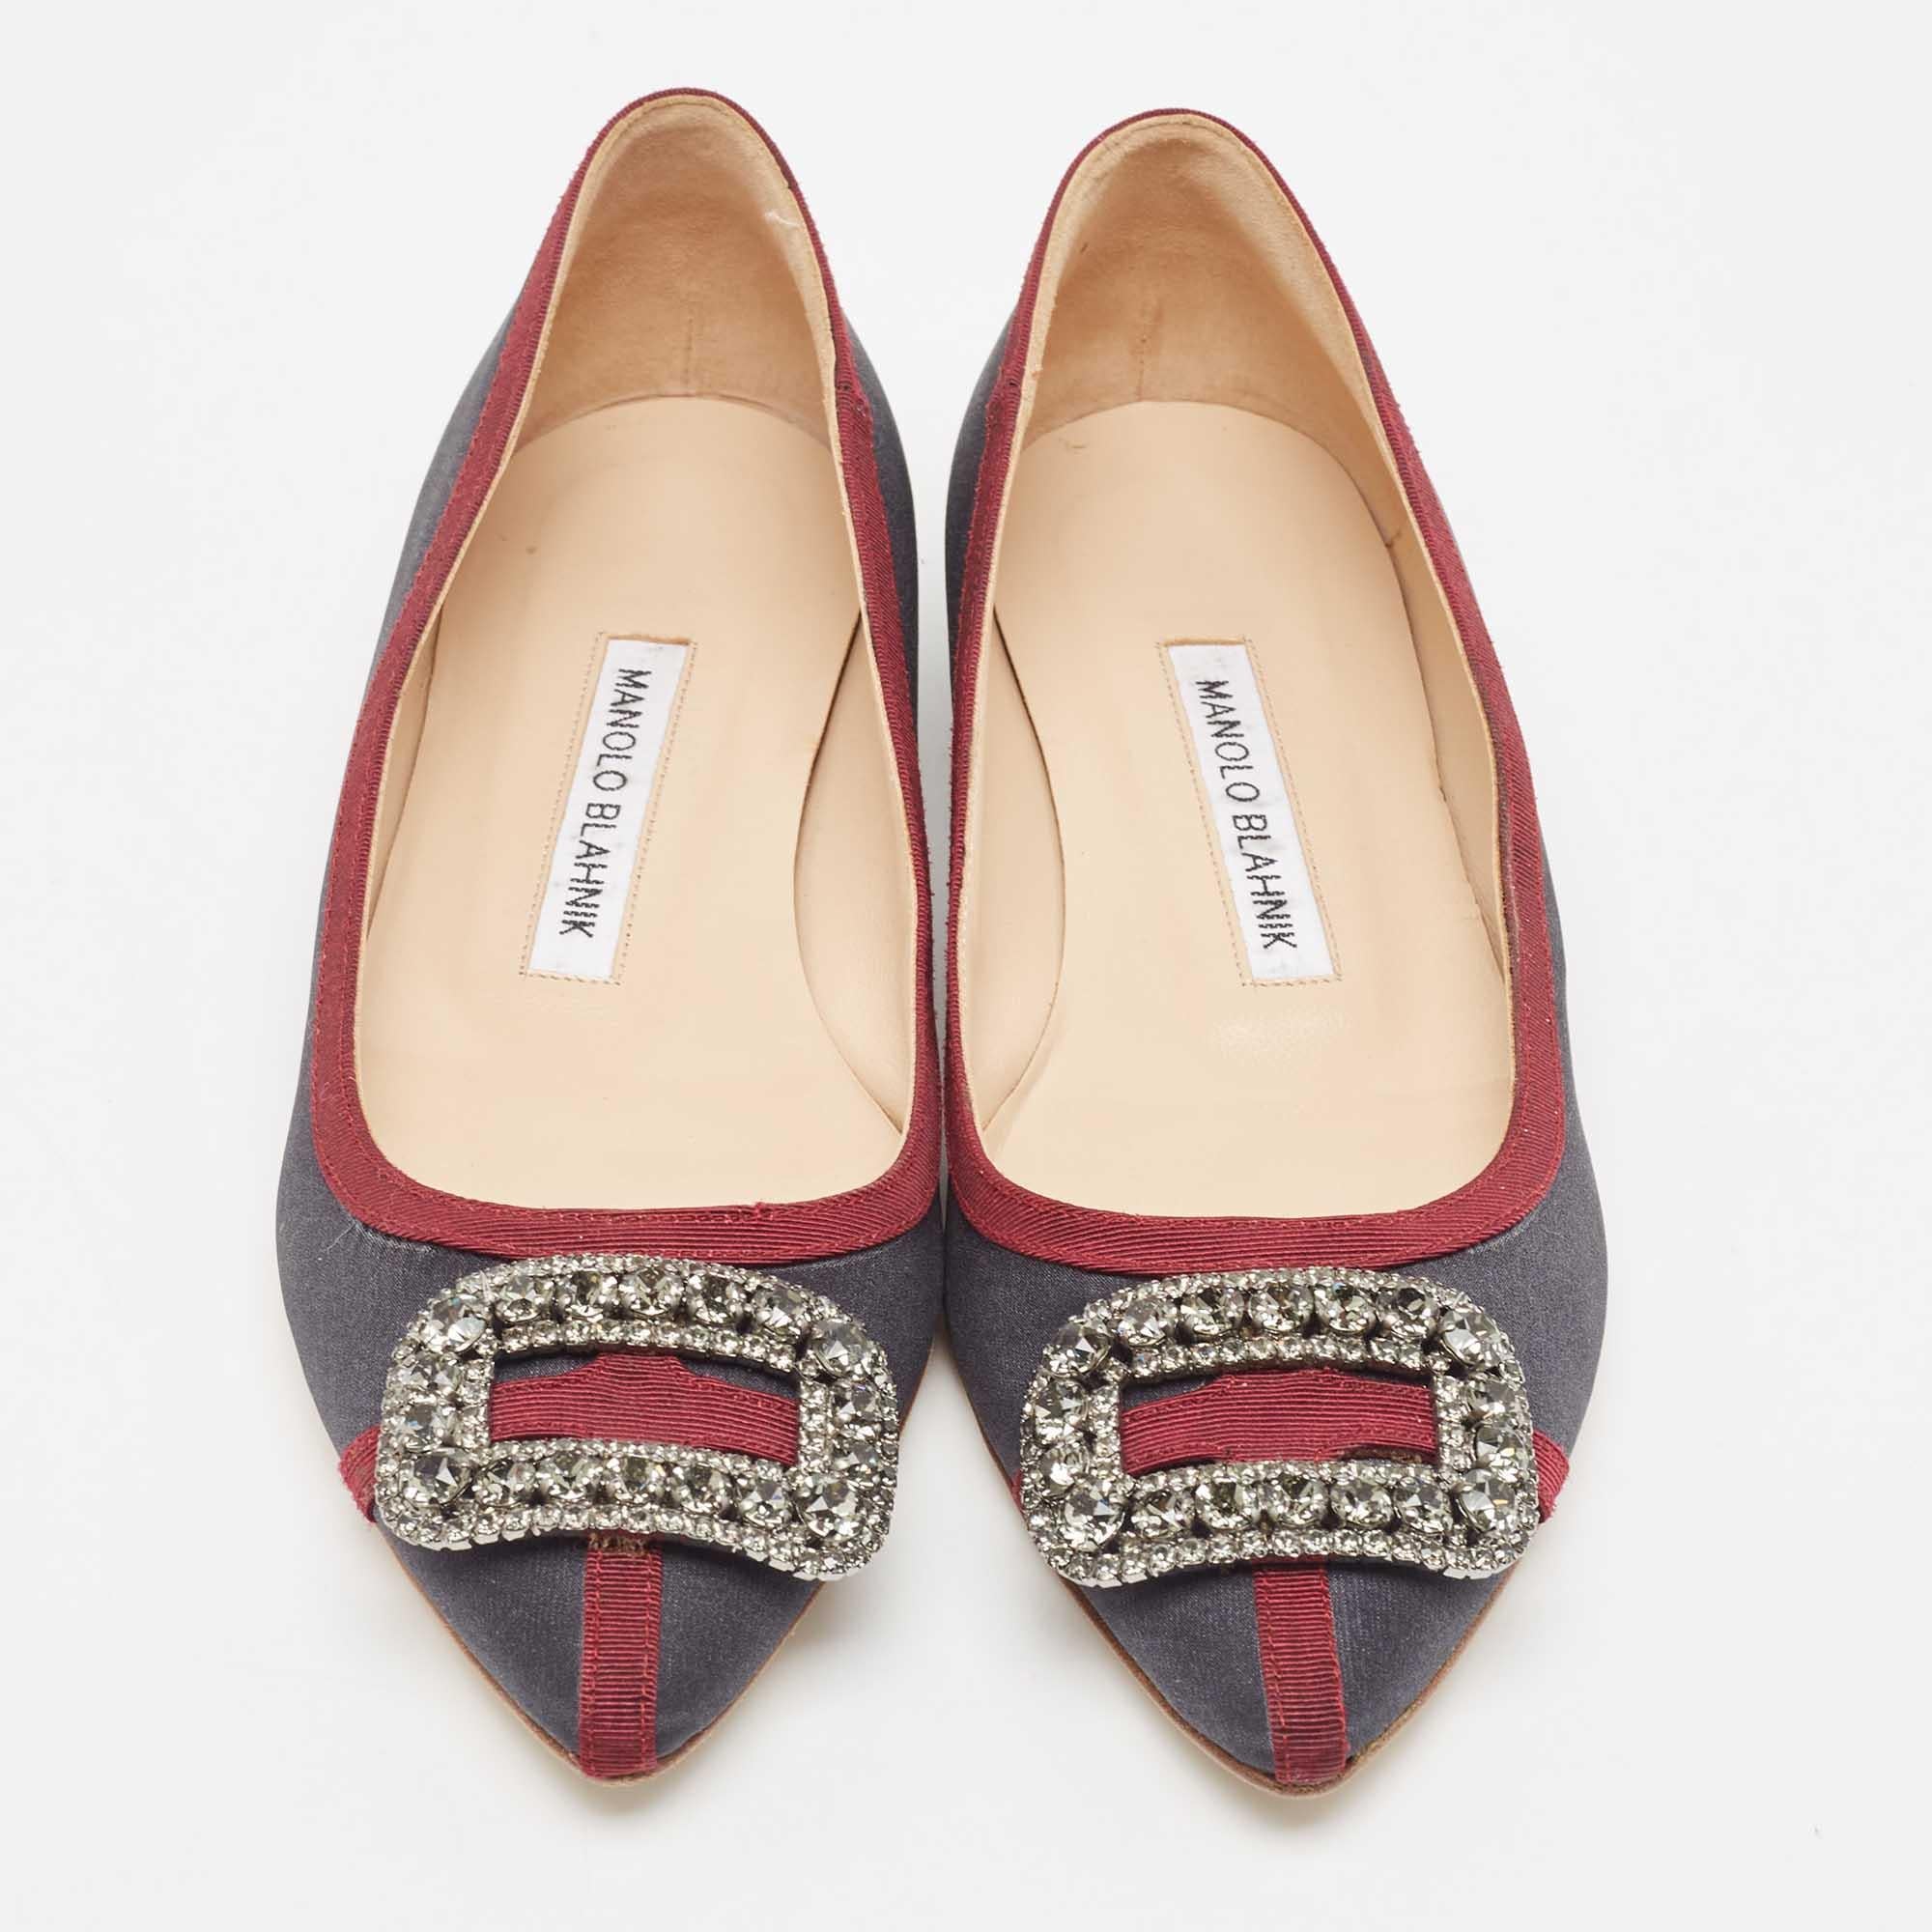 Complete your look by adding these Manolo Blahnik ballet flats to your lovely wardrobe. They are crafted skilfully to grant the perfect fit and style.

